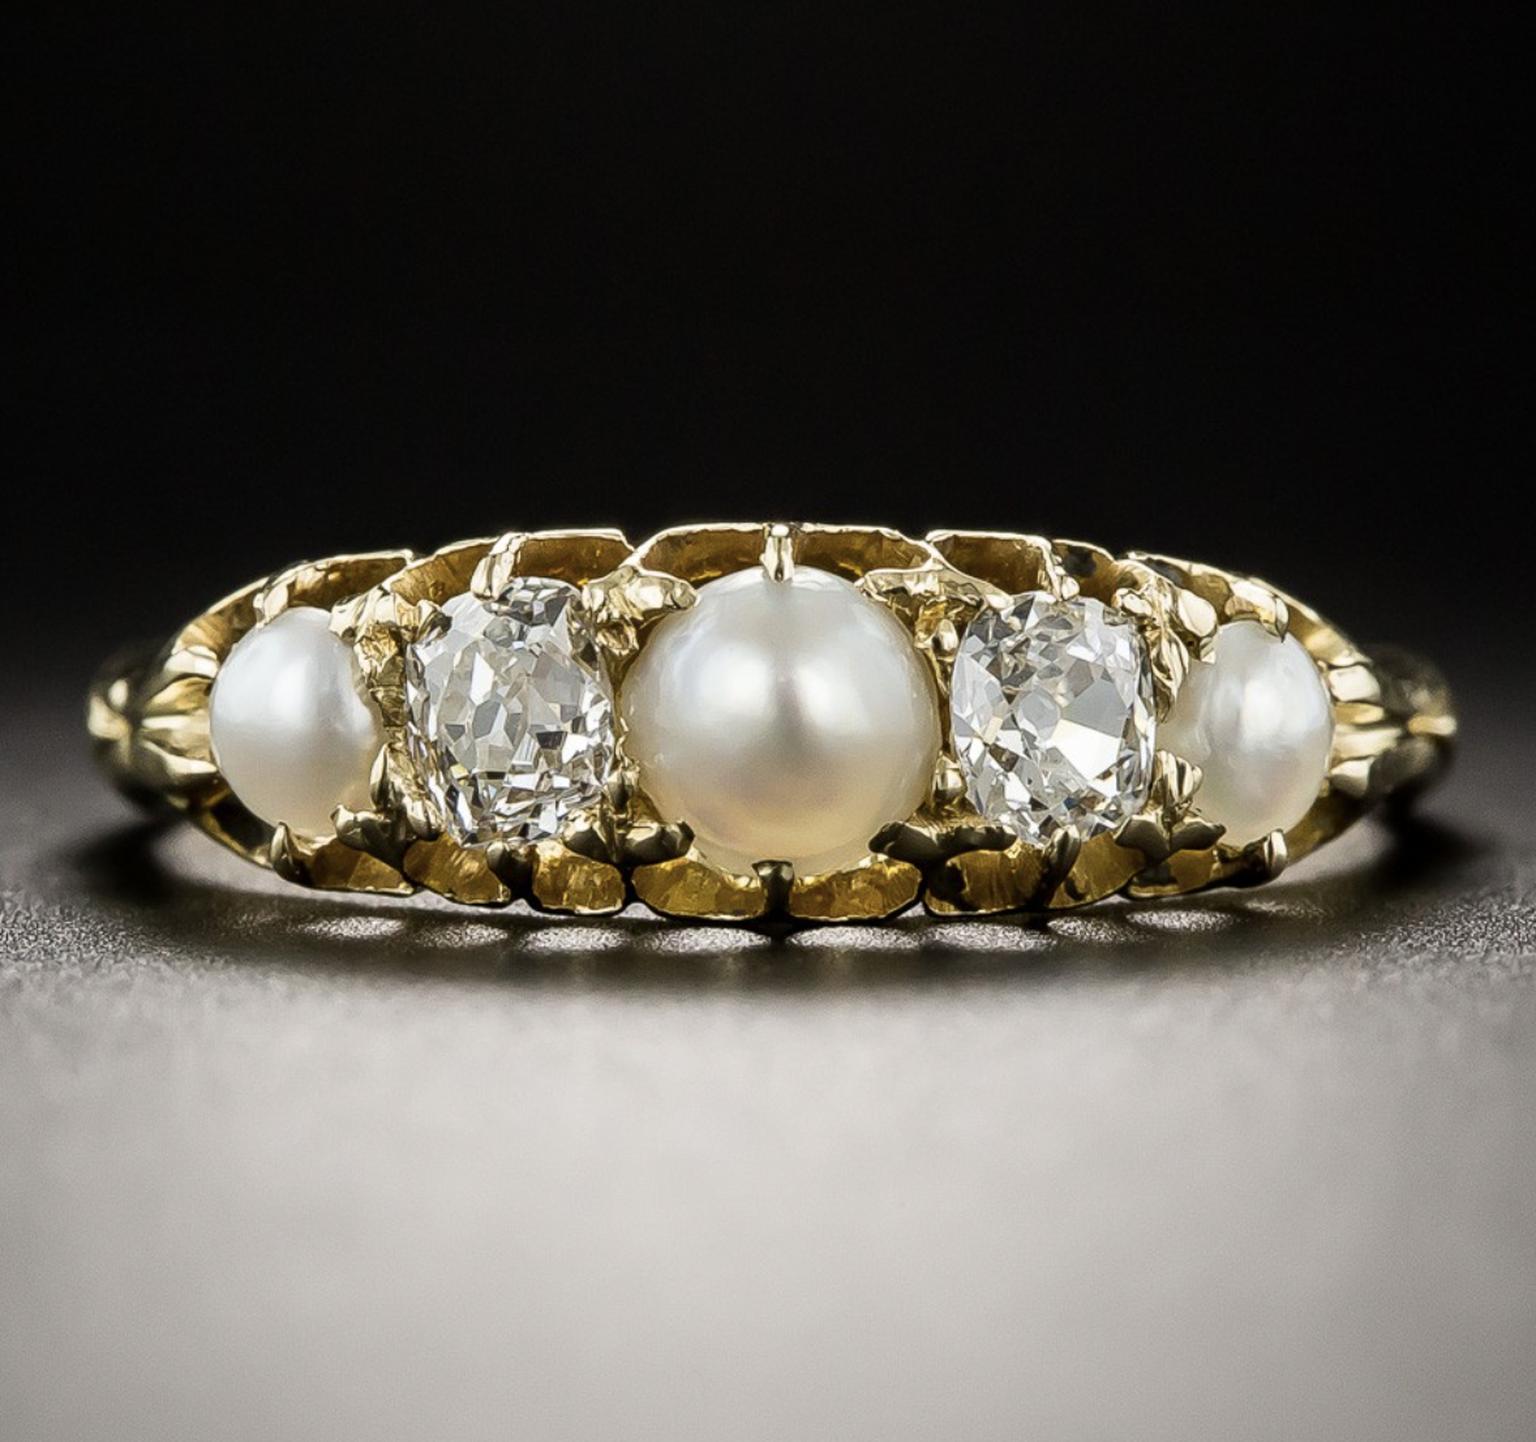 Natural pearl and diamond ring sold by Lang Antiques